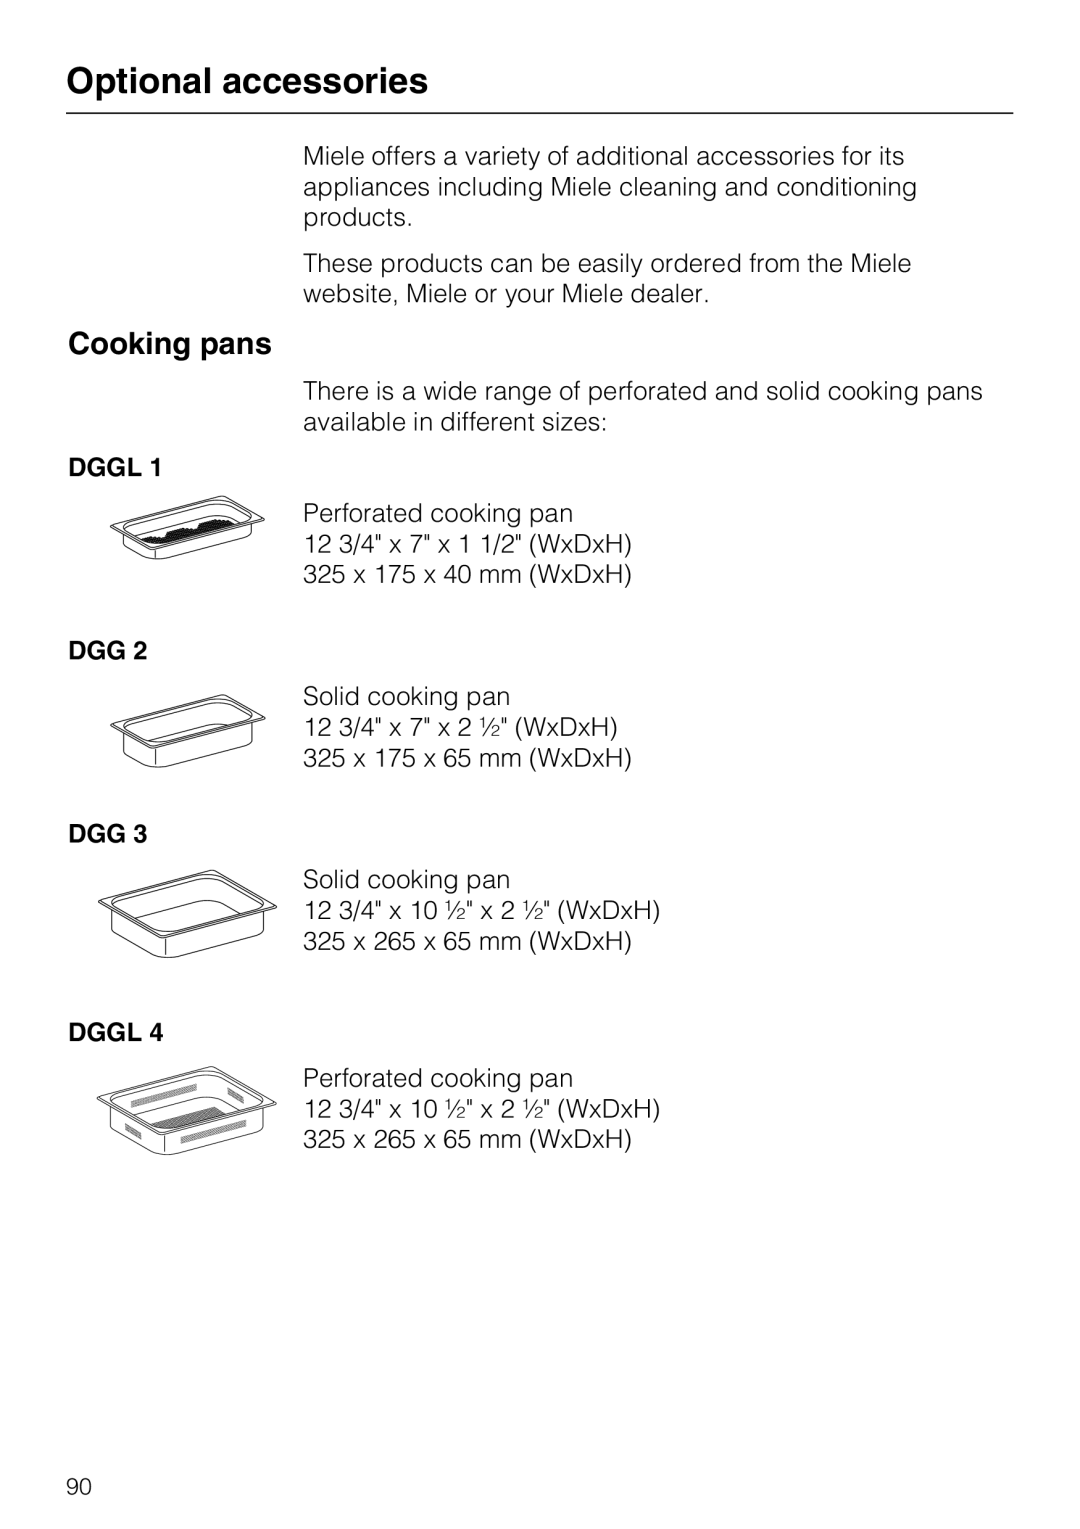 Miele 09 800 830 installation instructions Optional accessories, Cooking pans 